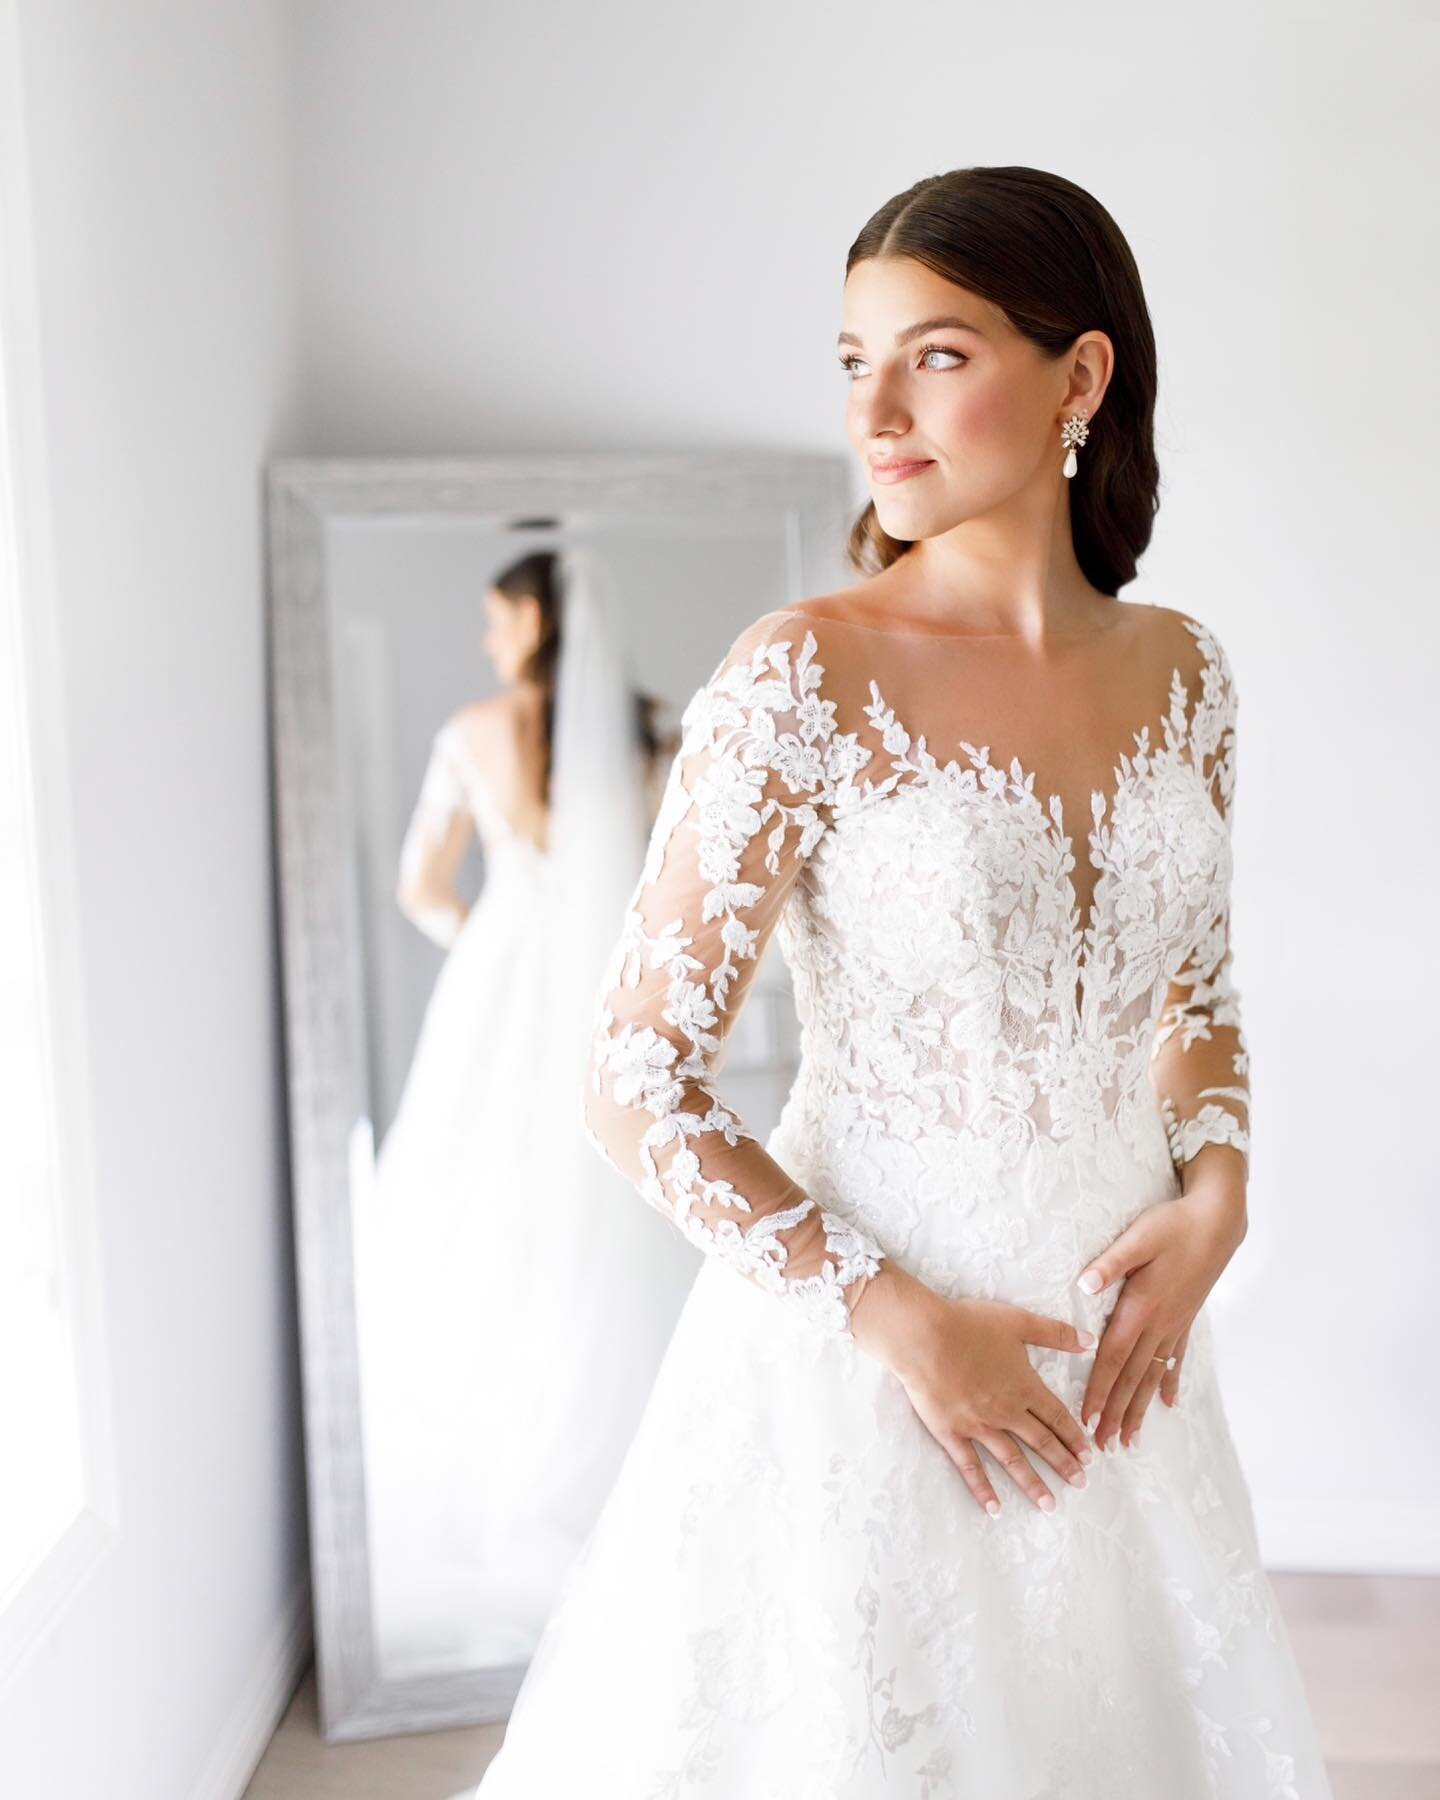 Pro Tip! When you are picking your getting ready location, make sure to see how much natural light is in the room! Ivana chose a beautifully bright space for her getting ready portraits and it made all of the difference. 

For all of the brides to be